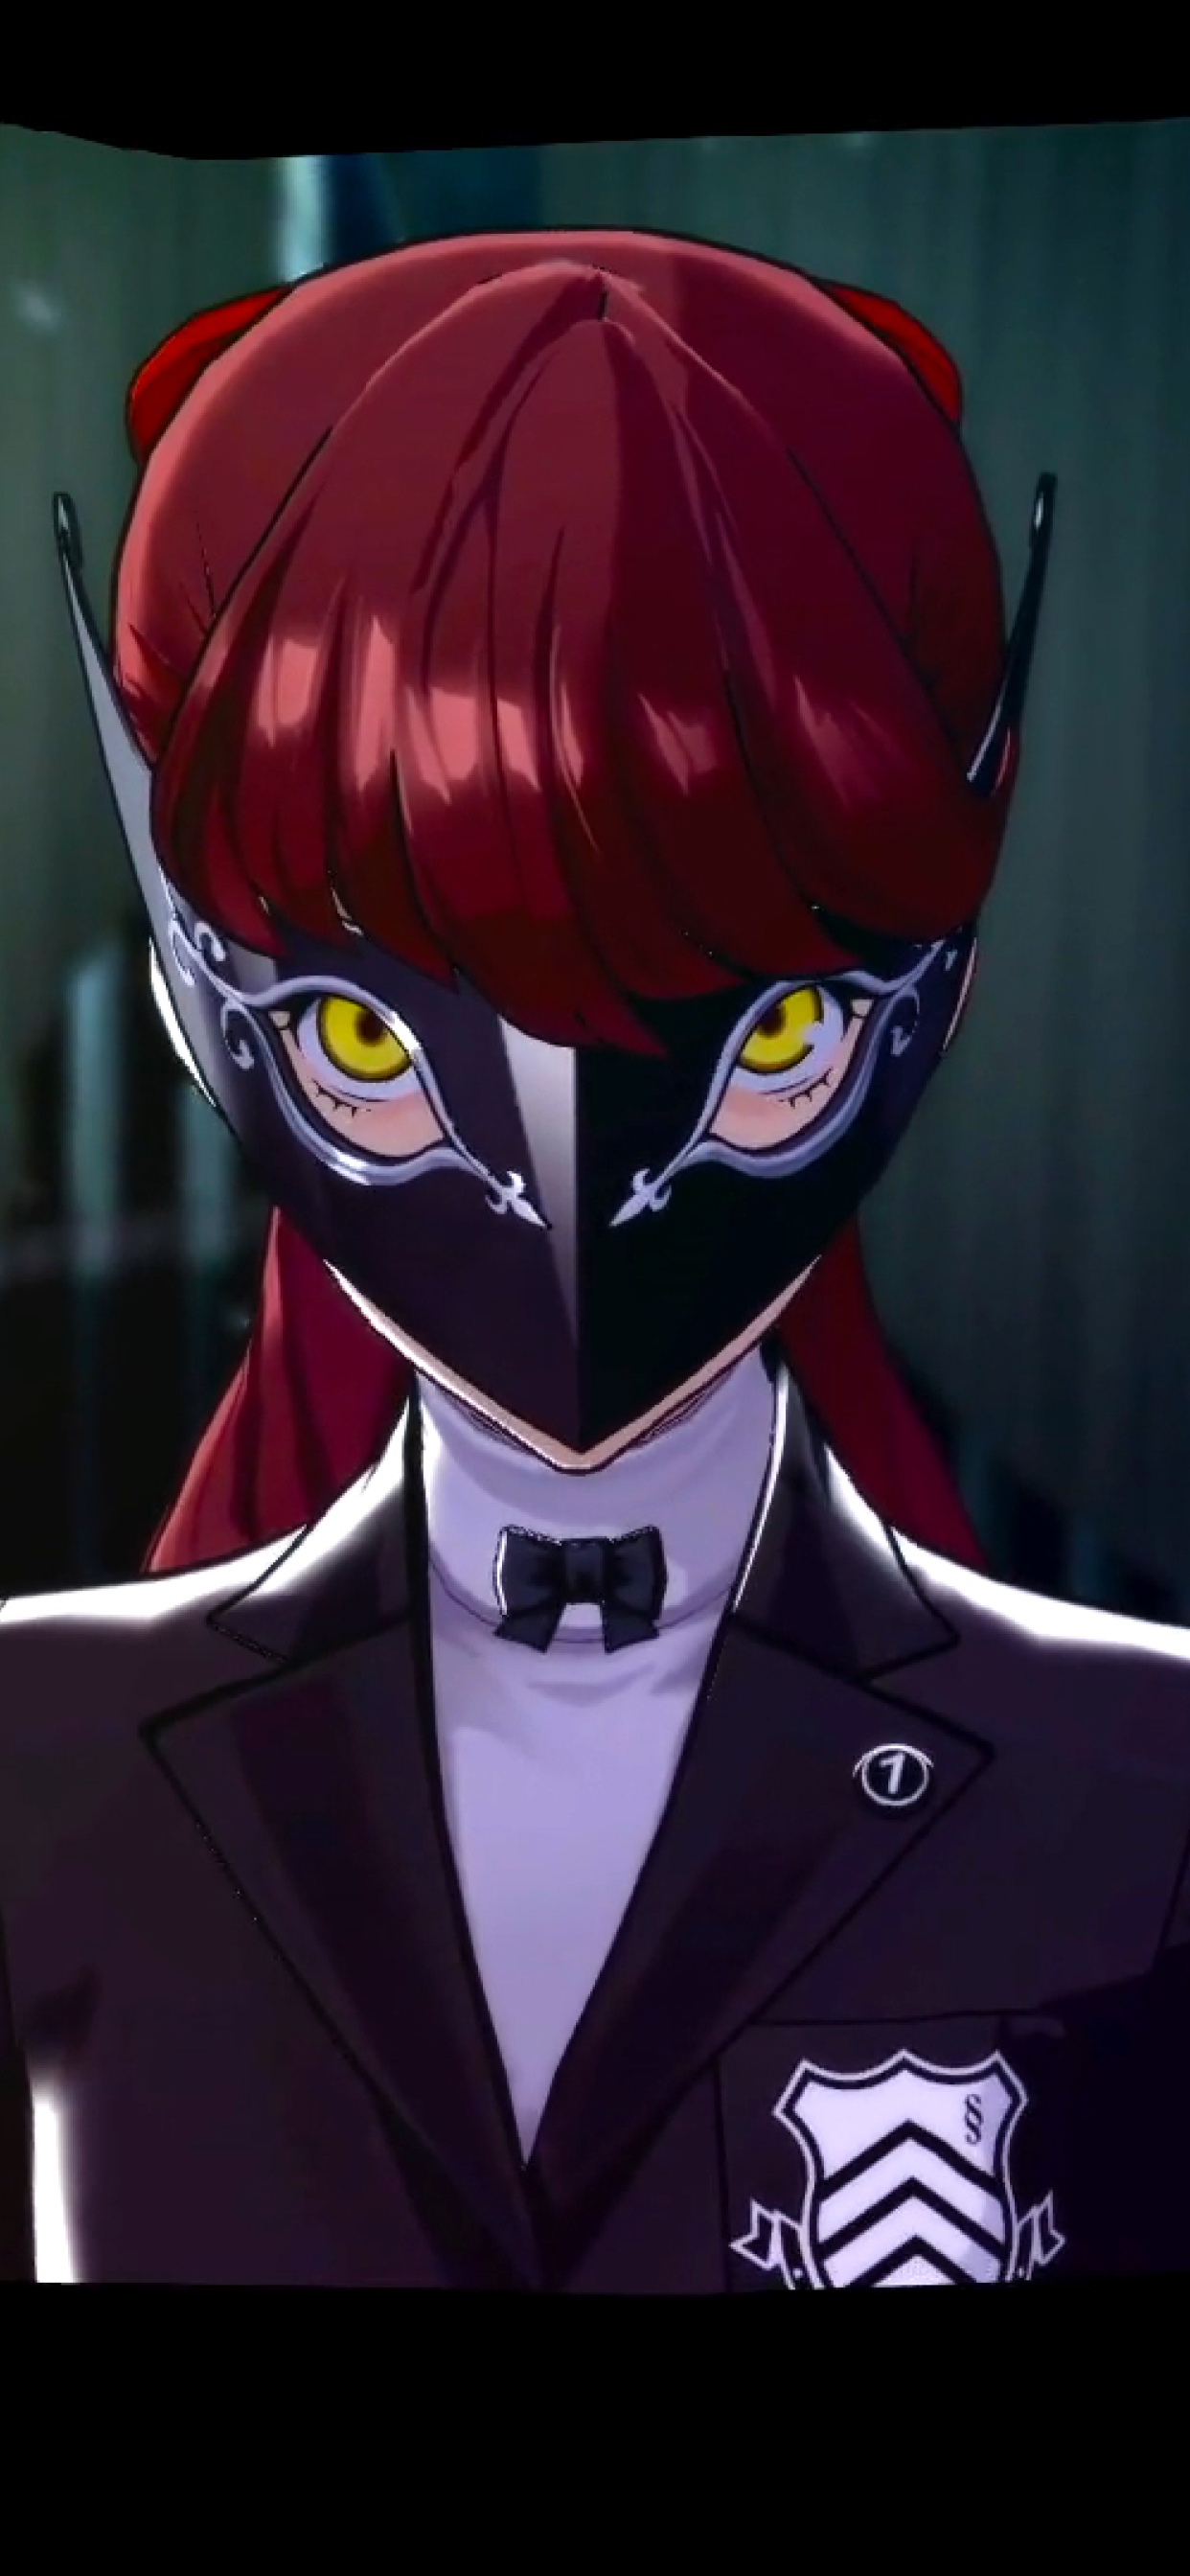 1242x26 Ann From Persona 5 Royal Iphone Xs Max Wallpaper Hd Games 4k Wallpapers Images Photos And Background Wallpapers Den